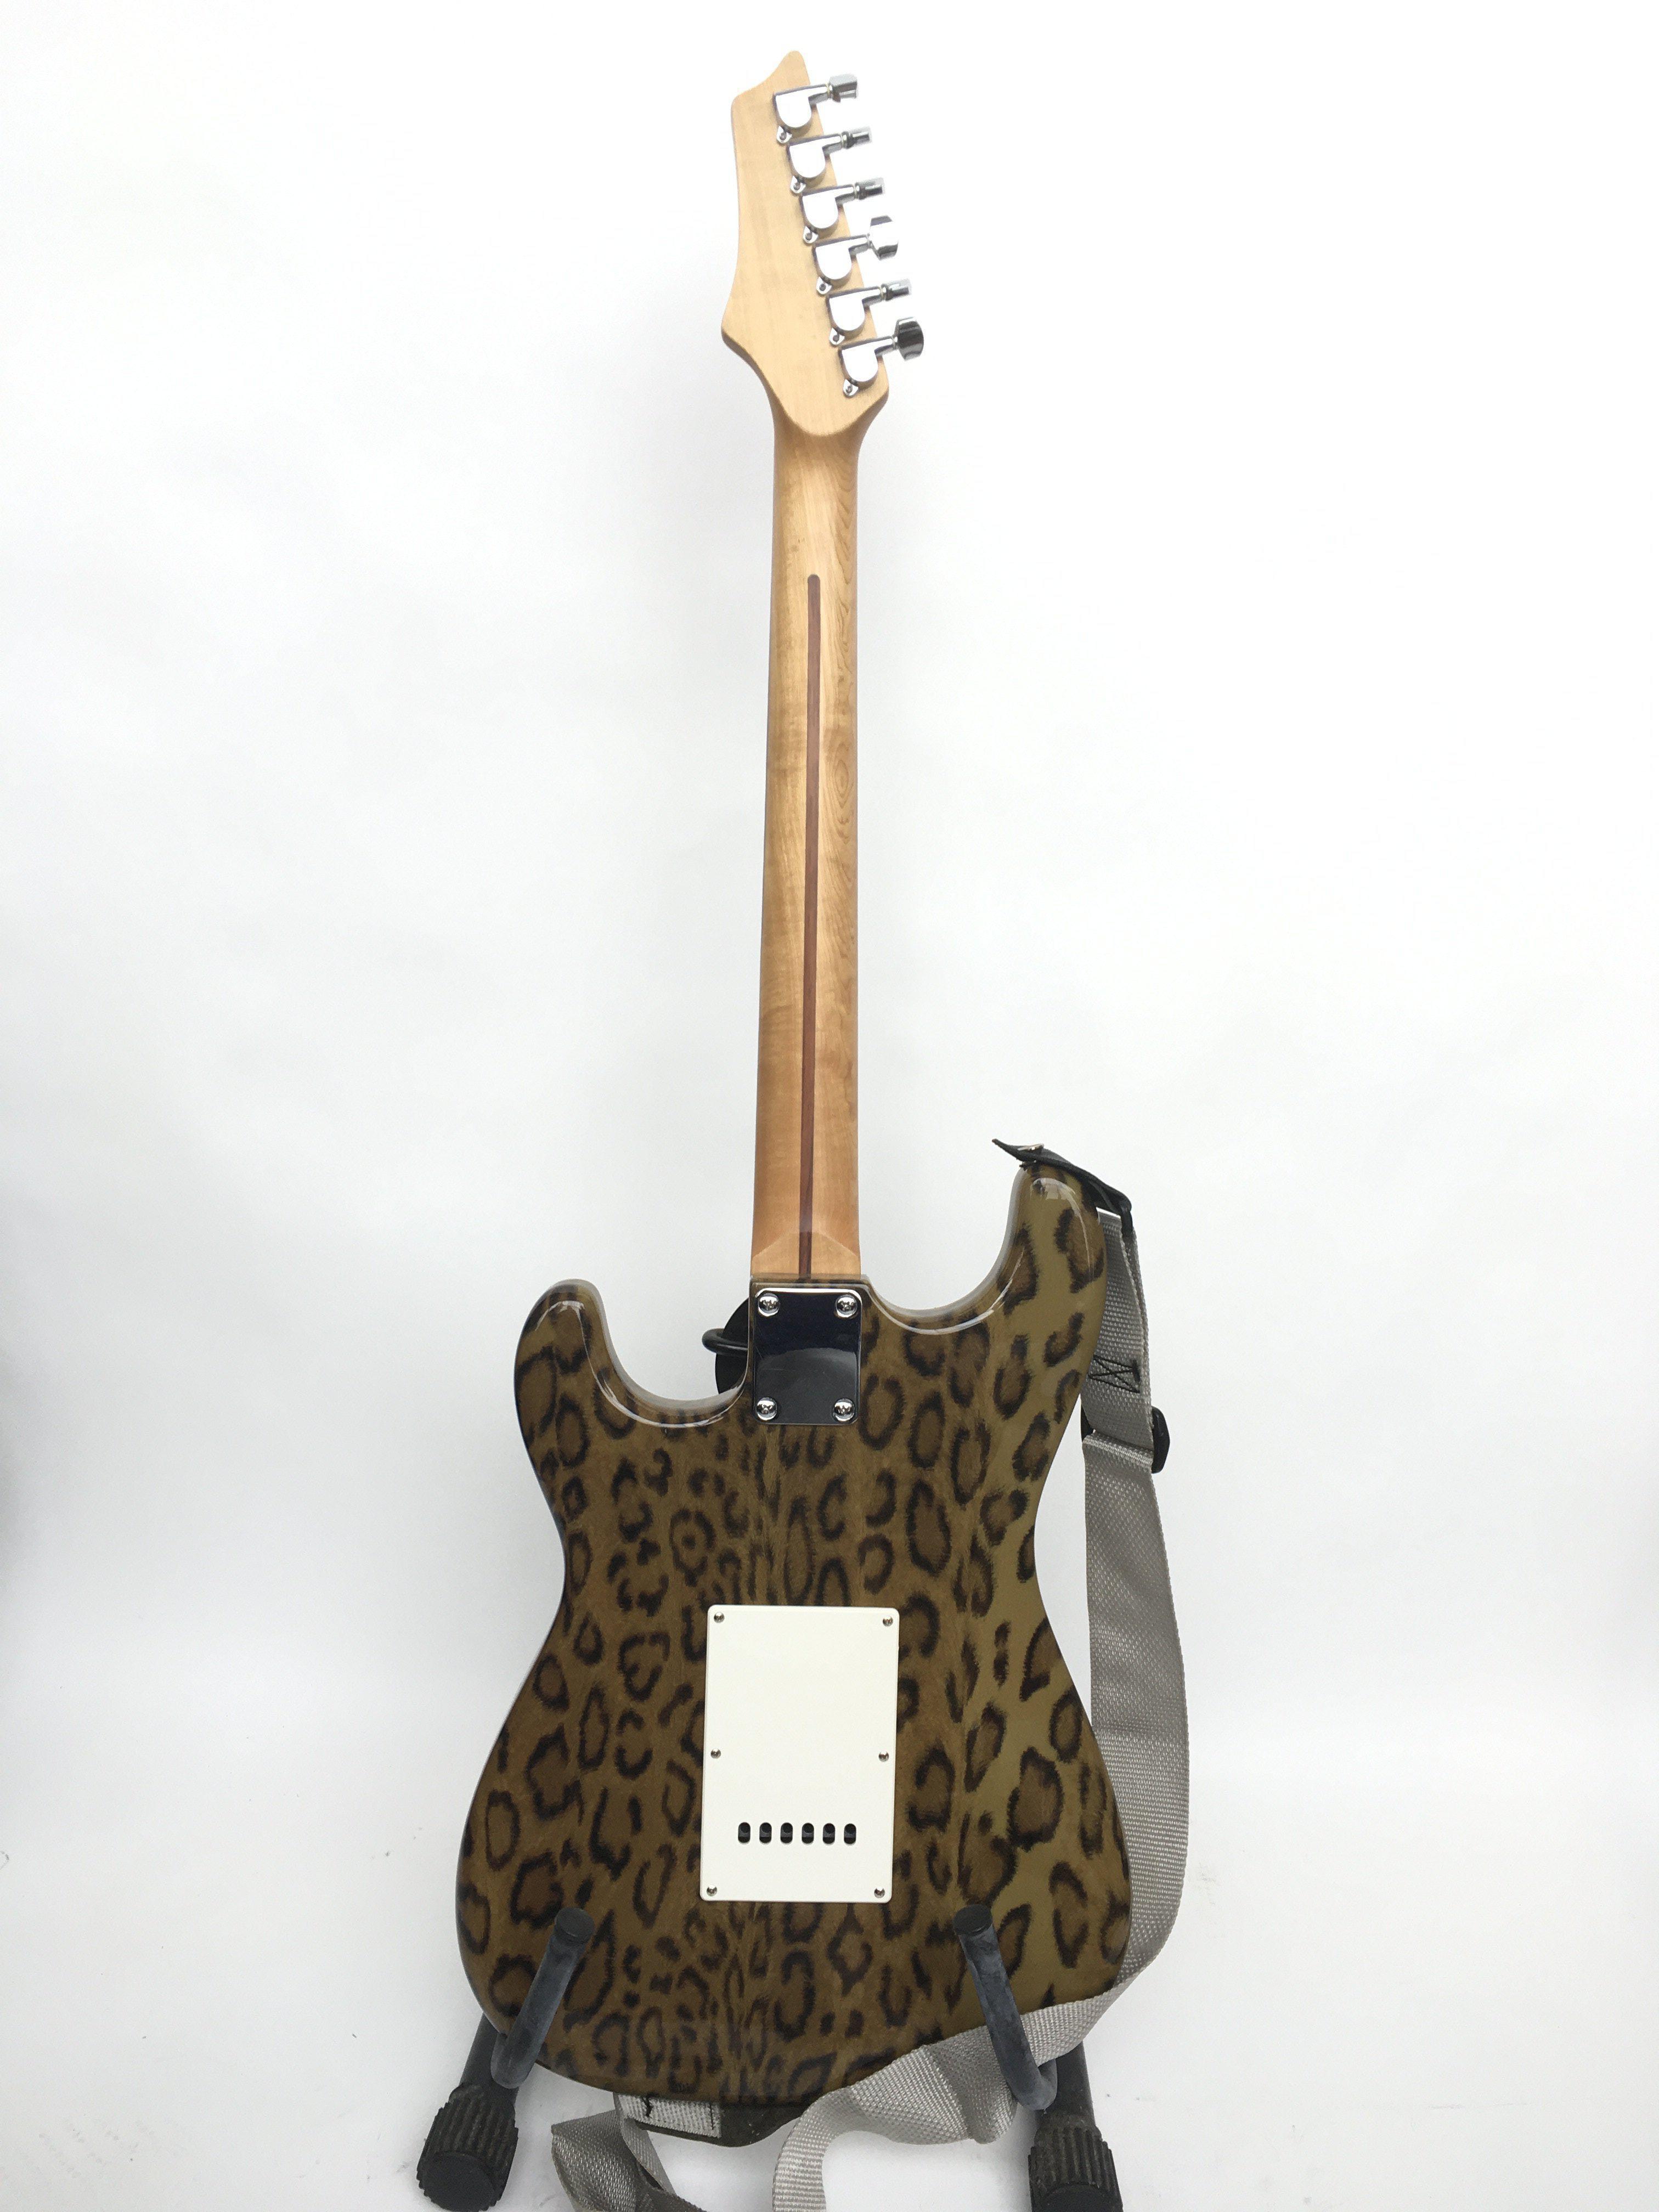 An AXL Strat style electric guitar with leopard pr - Image 4 of 4